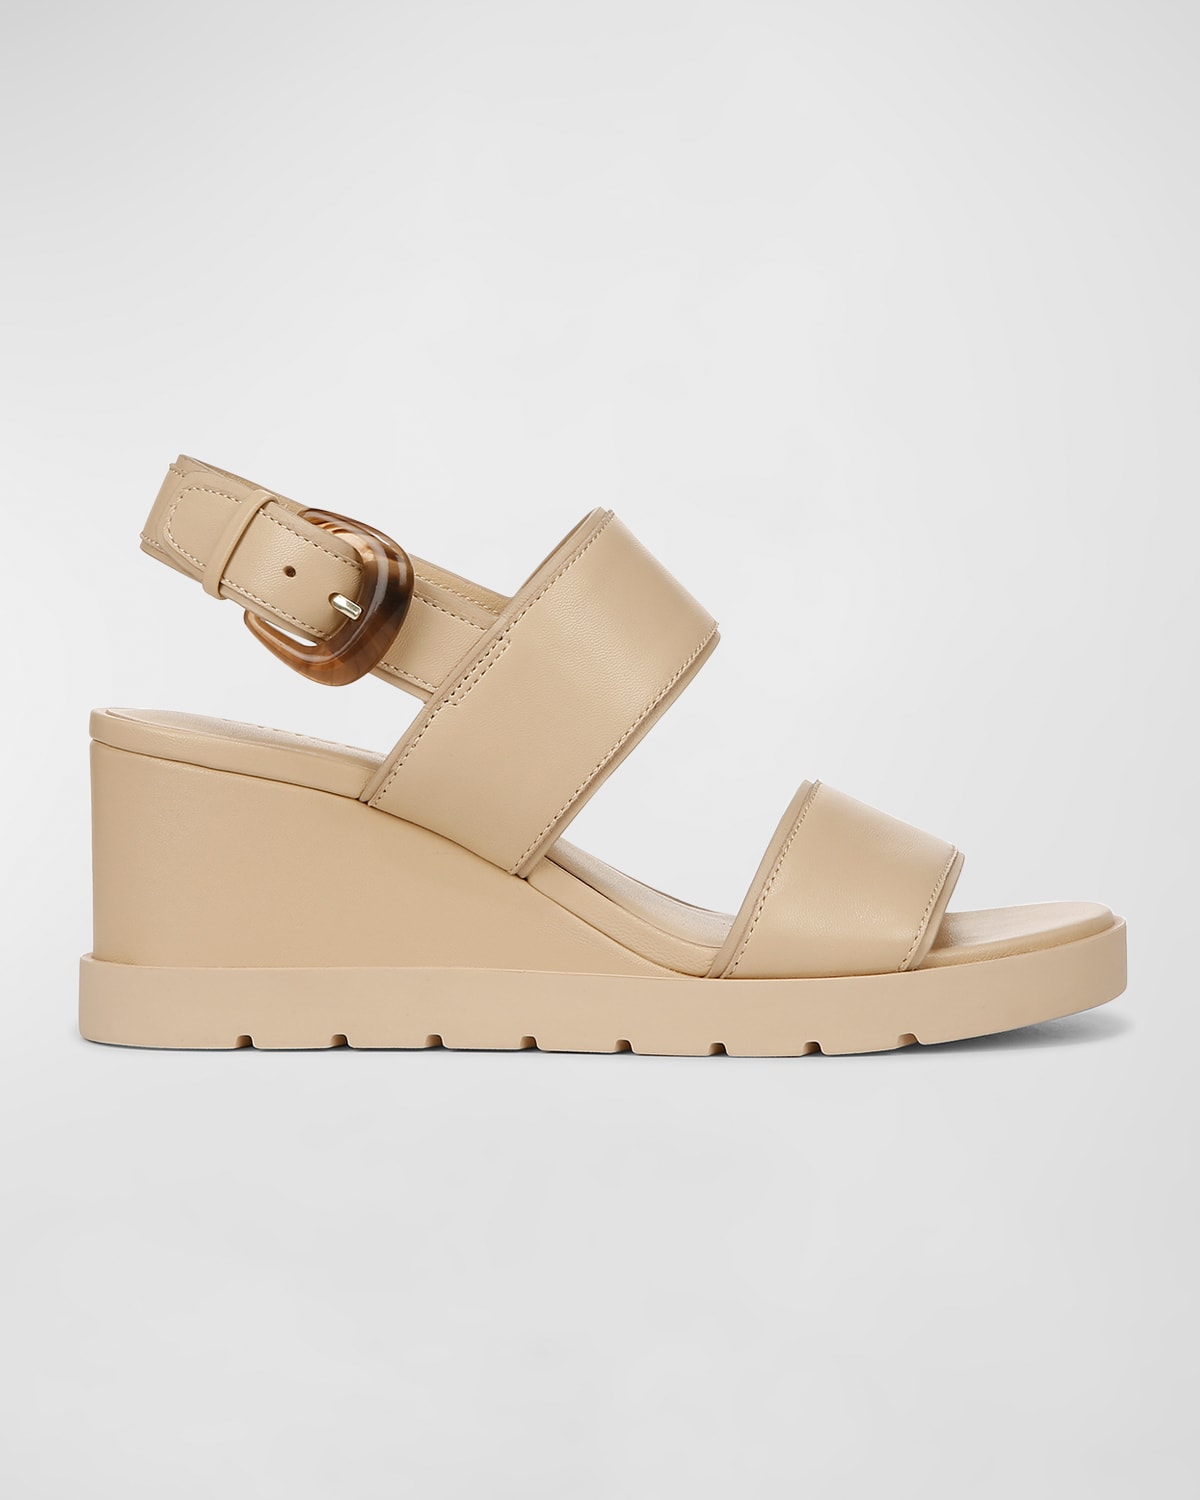 Vince Roma Leather Wedge Slingback Sandals In Macadamia Beige L